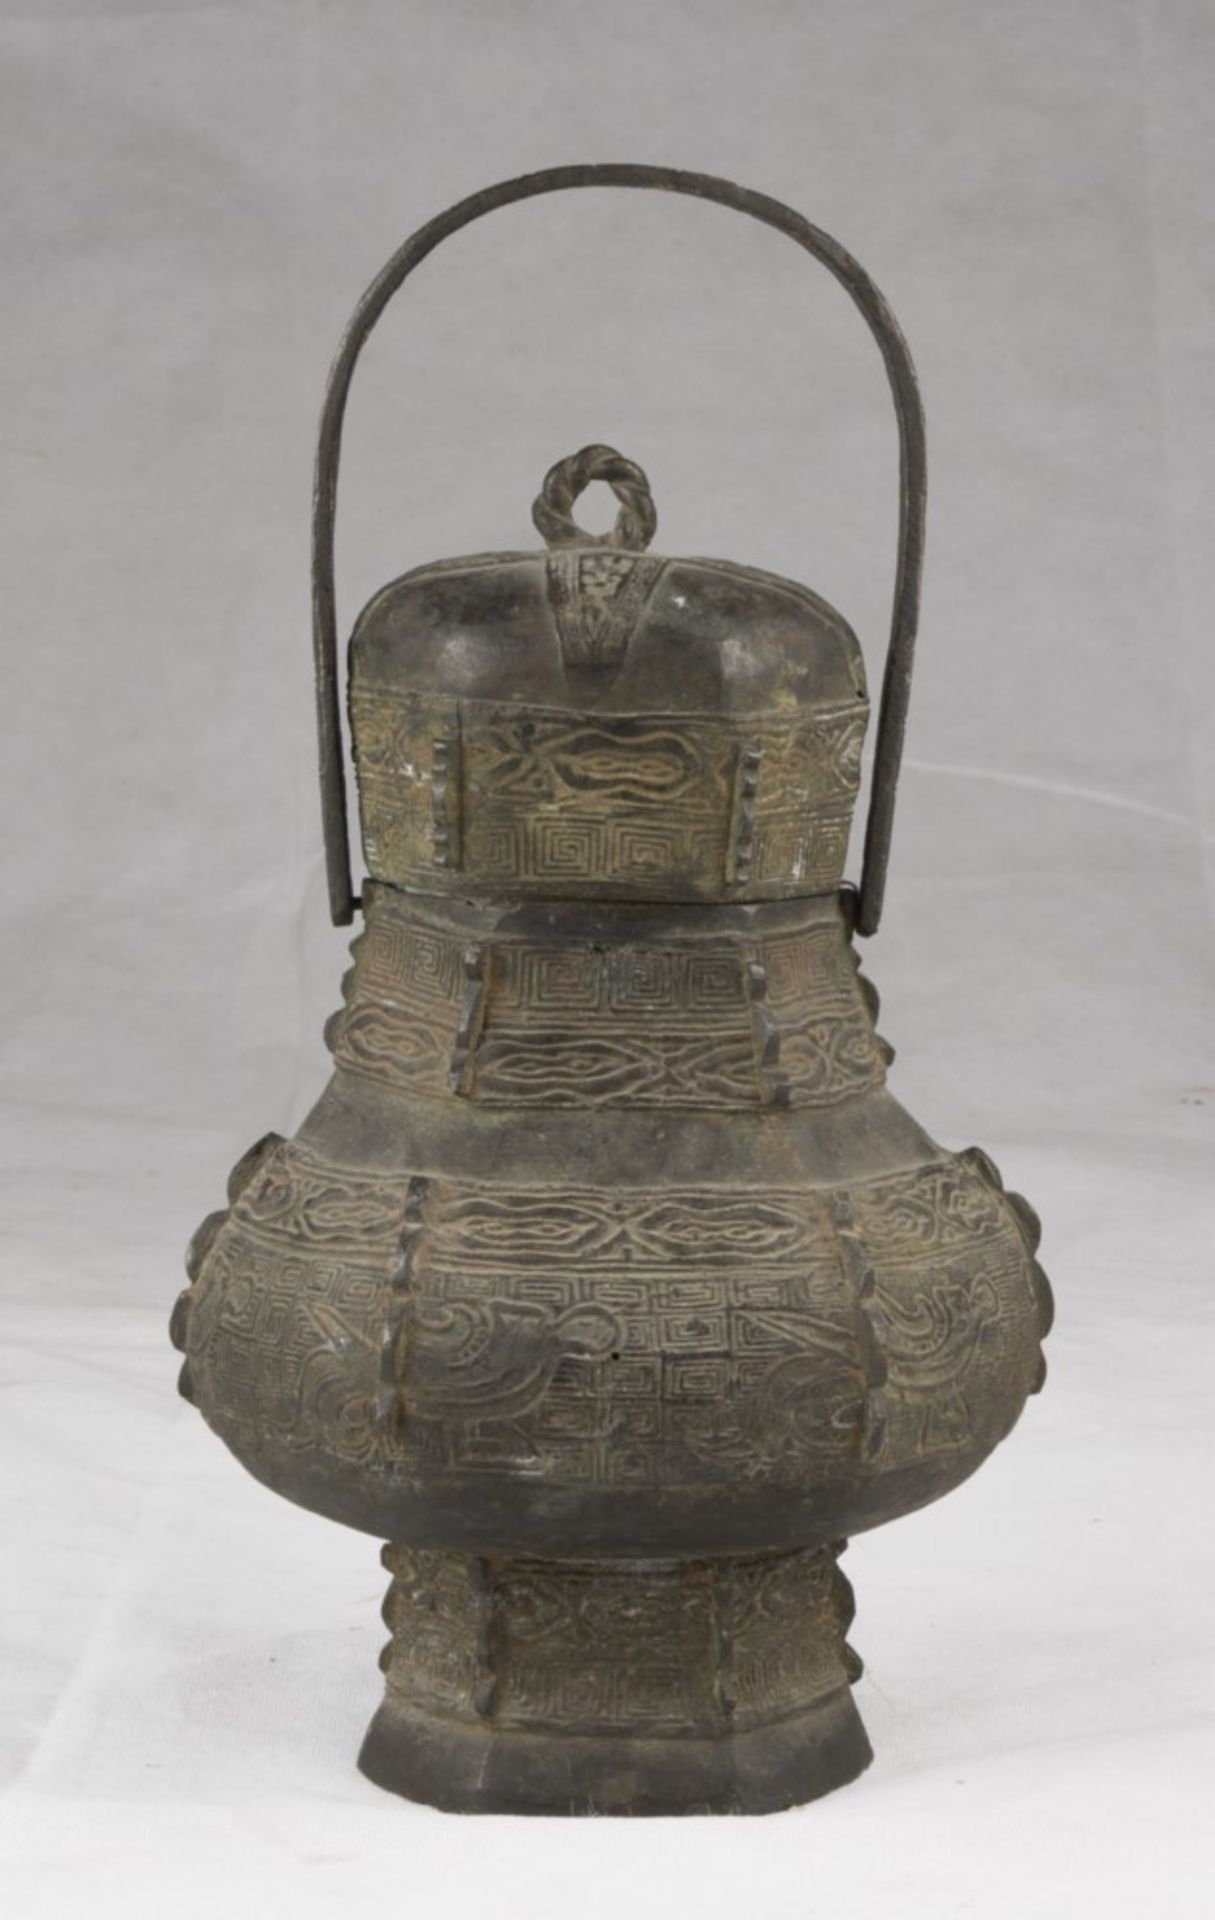 A Chinese burnished patina bronze case. 20th century. Measures cm. 36 x 20 x 16. CONTENITORE IN